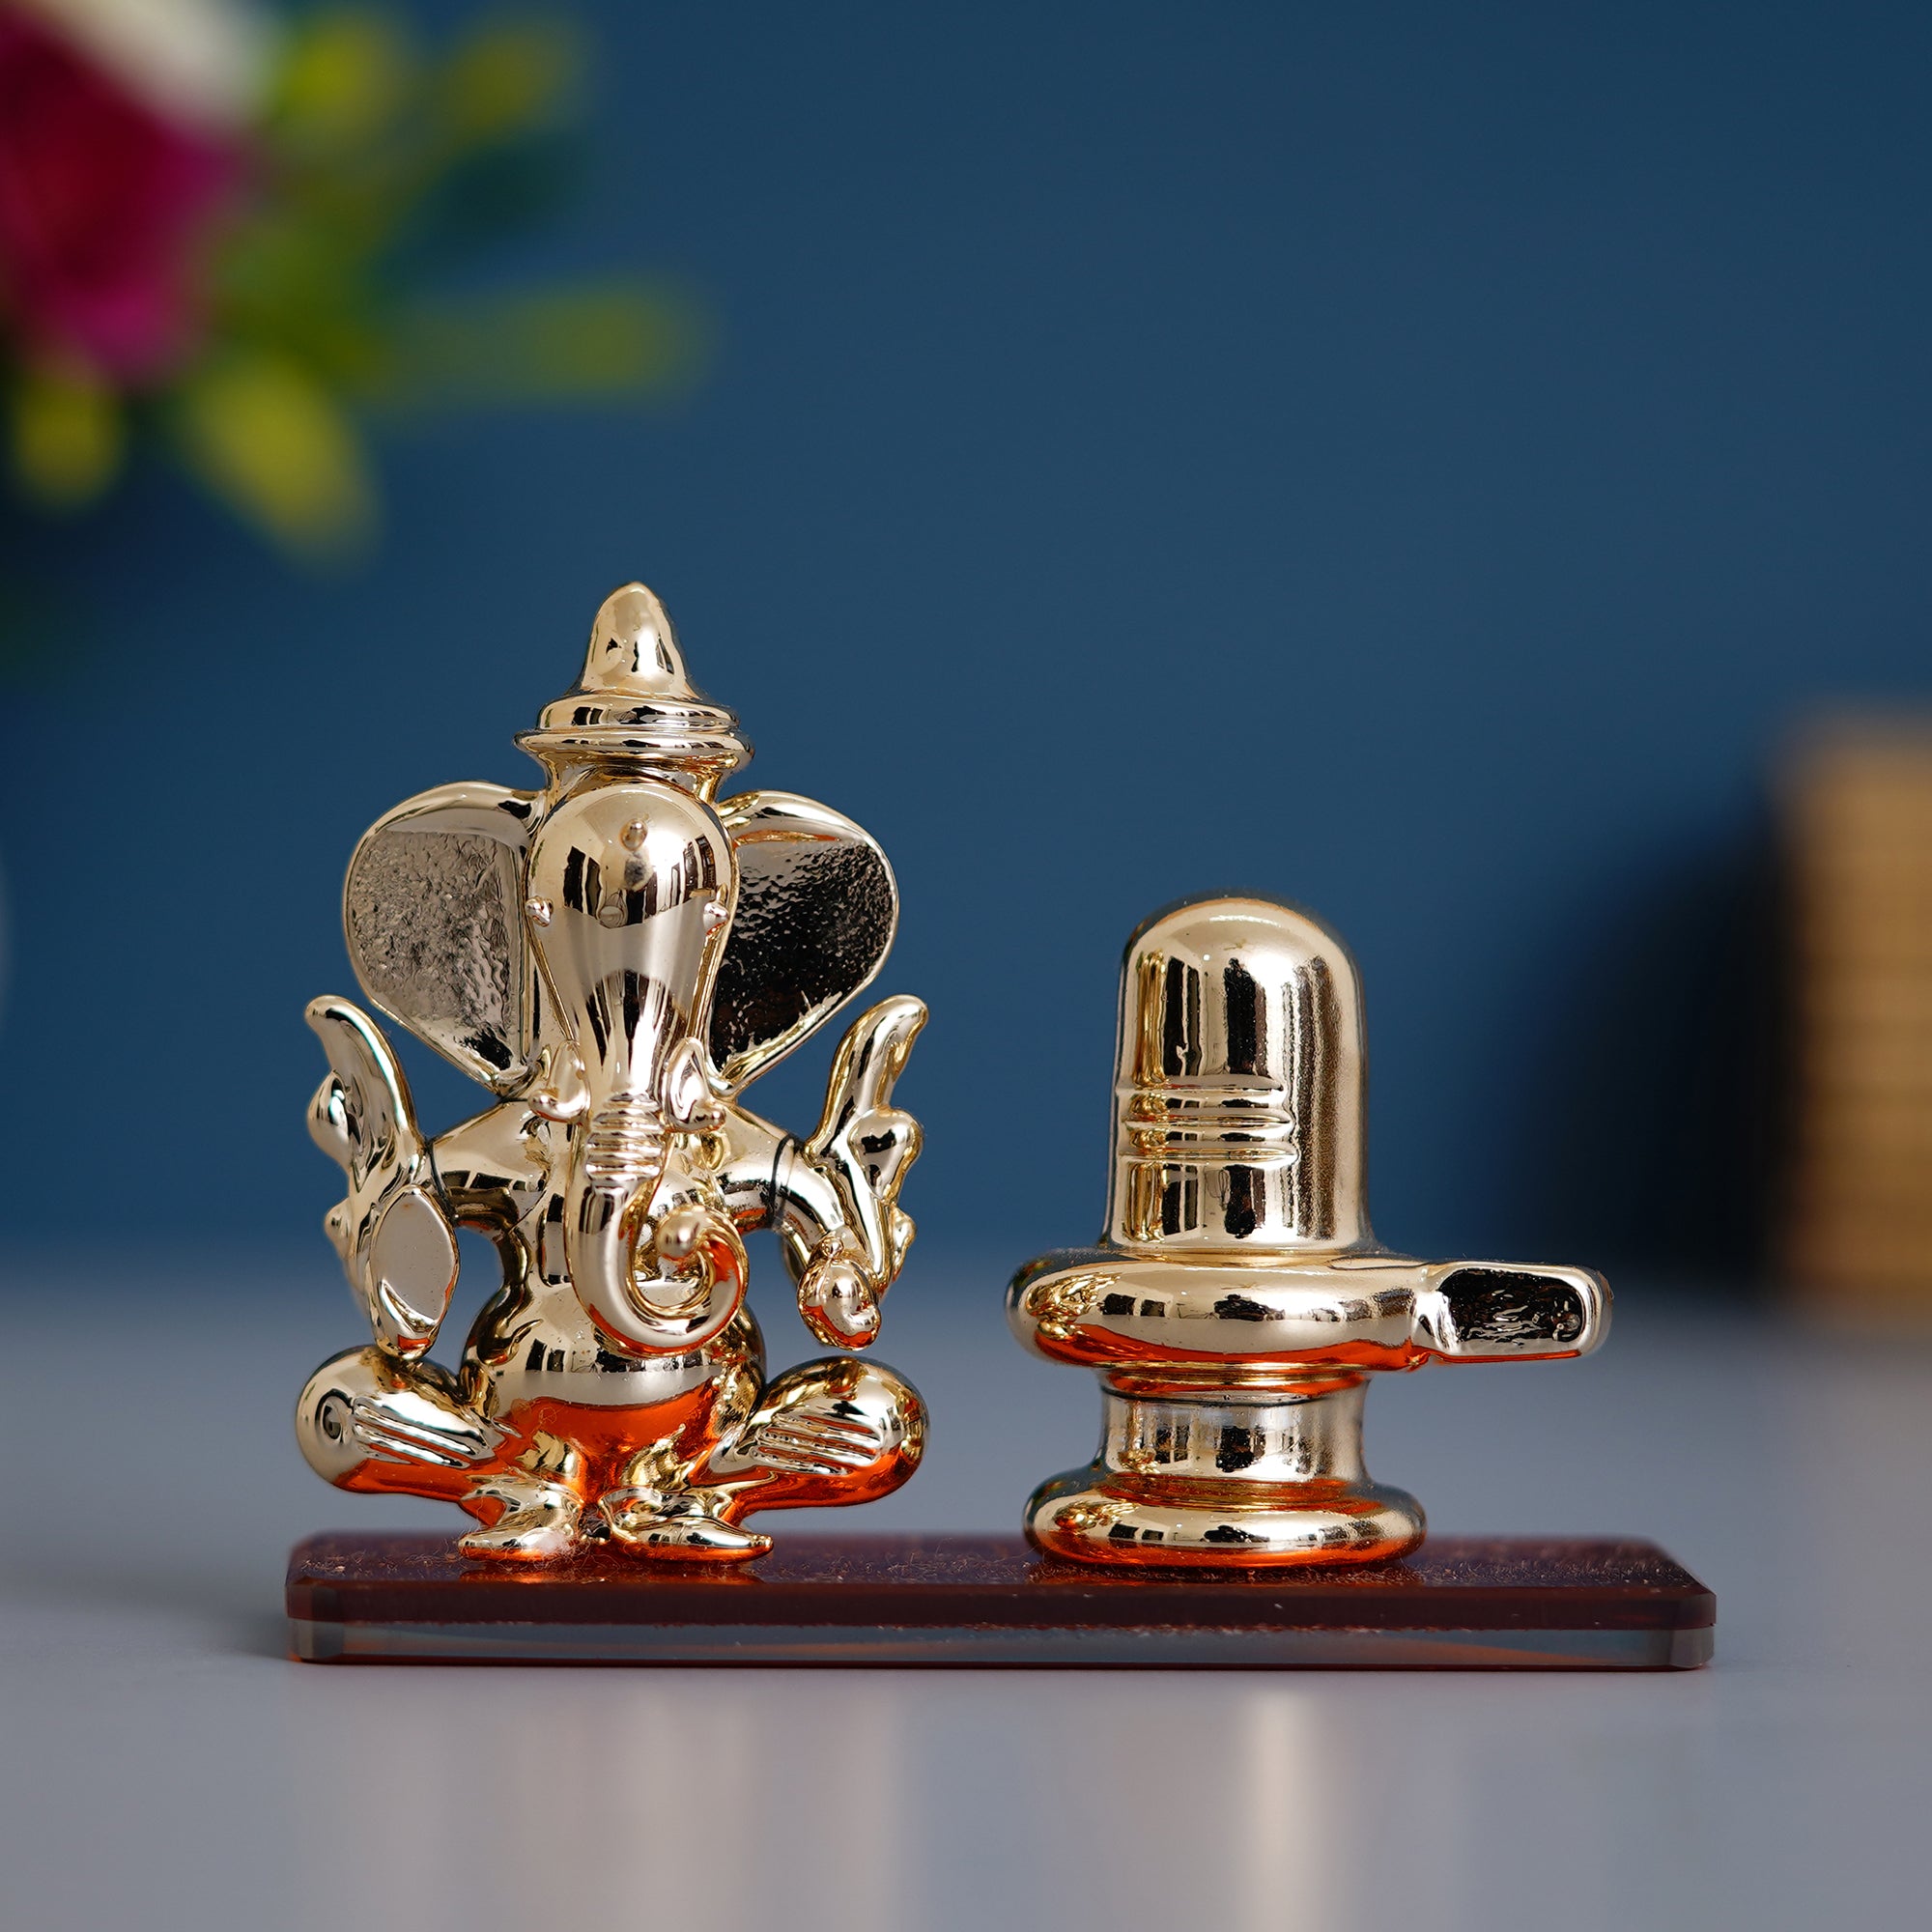 Orange Lord Ganesha with Shivling Crystal Statue for Home and Car Dashboard